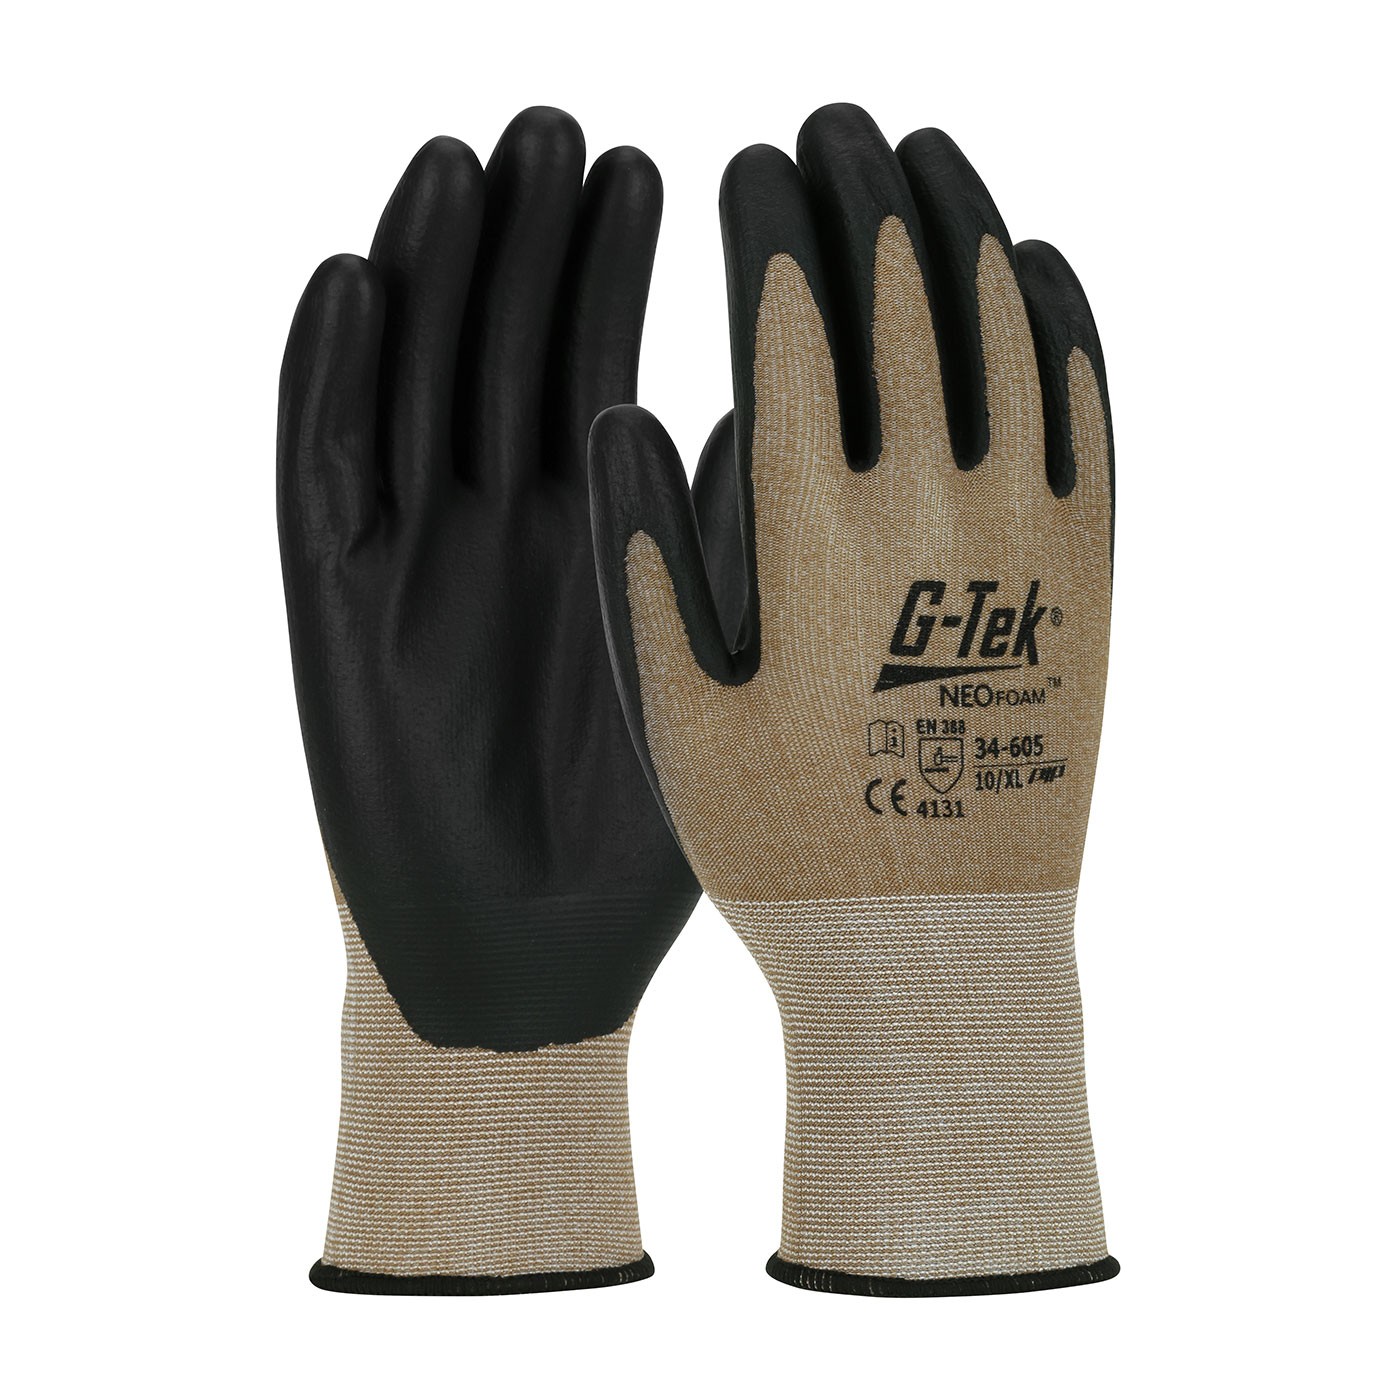 G-Tek® NeoFoam® Seamless Nylon Glove with NeoFoam® Coated Palm & Fingers - Touchscreen Compatible (#34-605)